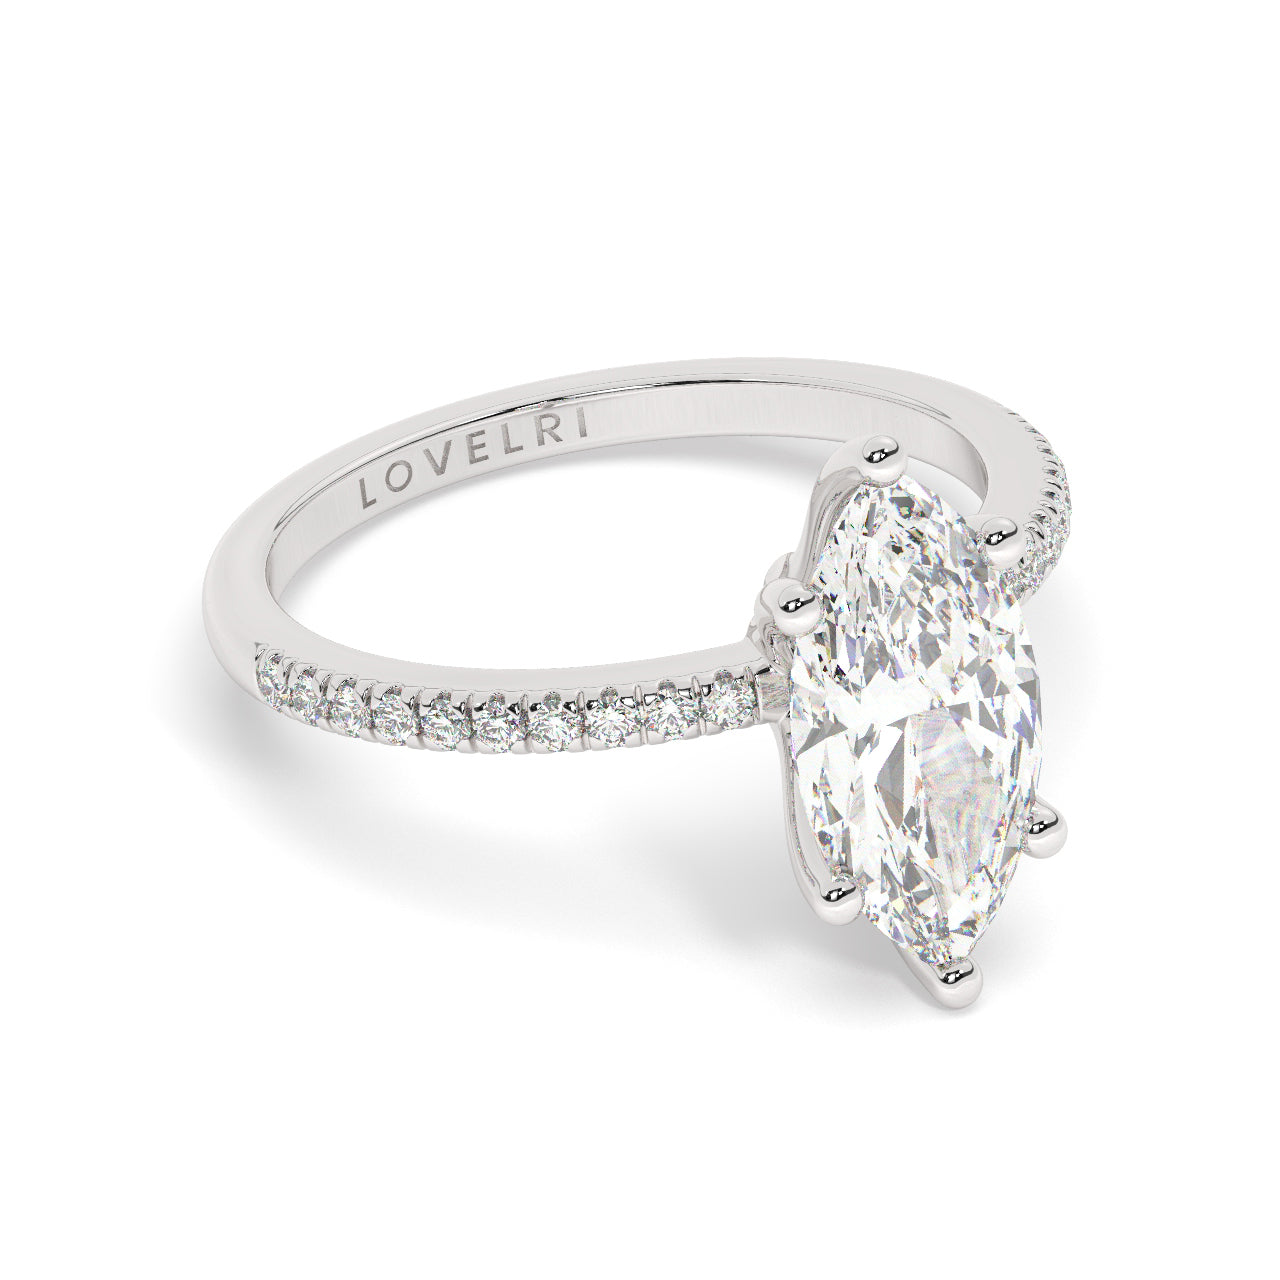 Marquise Cut Diamond Ring set on a Pavé Band in White Gold - Rotated View